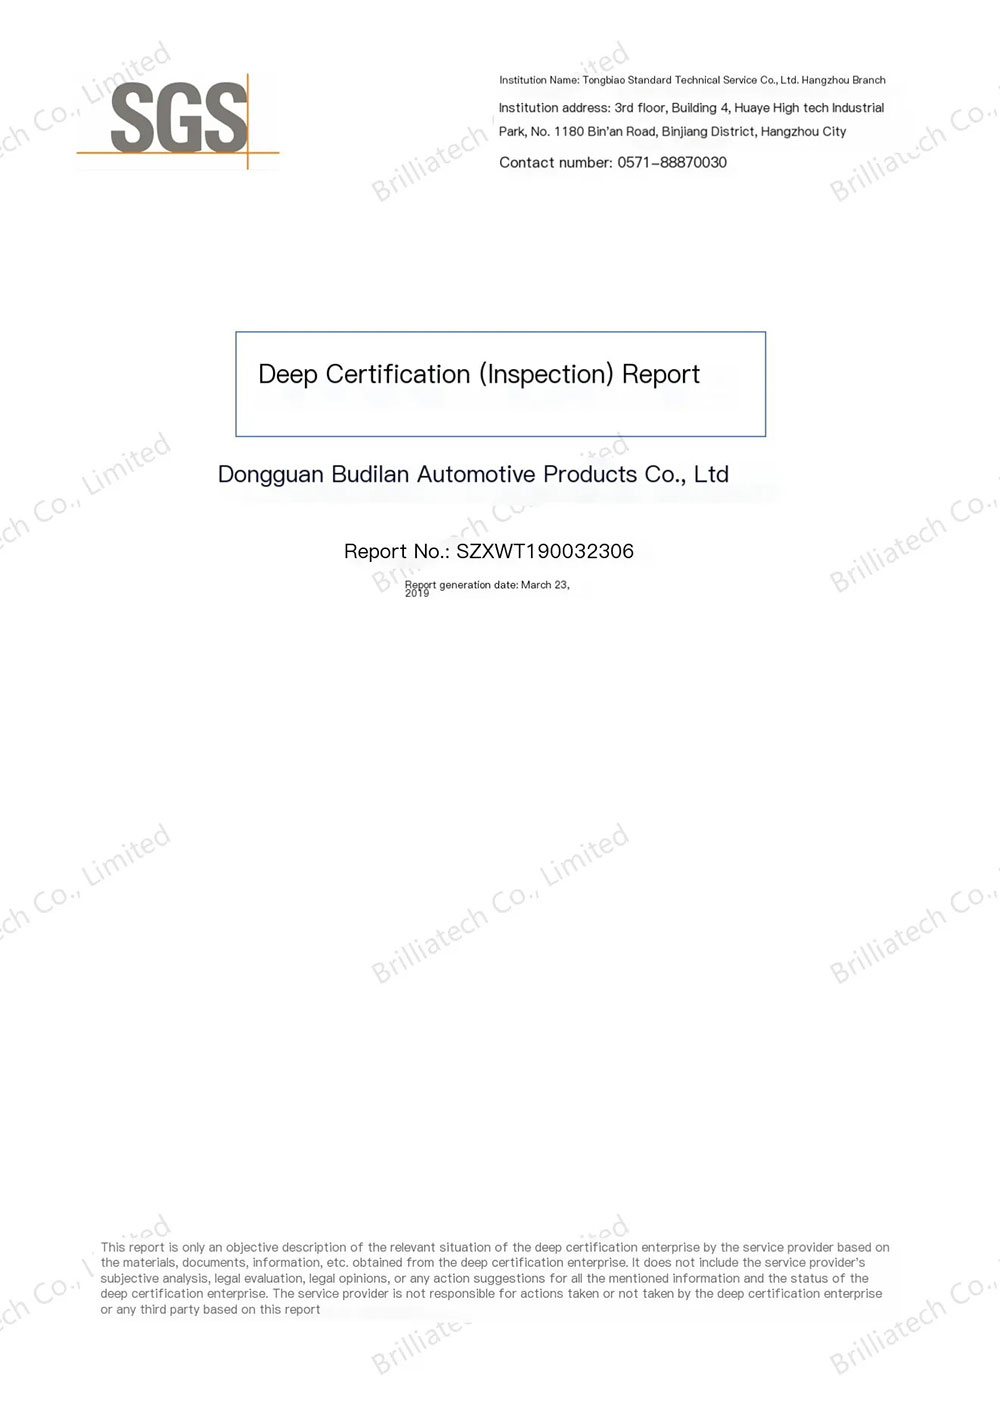 SGS Deep Certification (Inspection) Report for Brilliatech, Magic Clay Mitt, Clay pad, Clay Towel , car wash tools, Magic Clay Bar and Clay Block